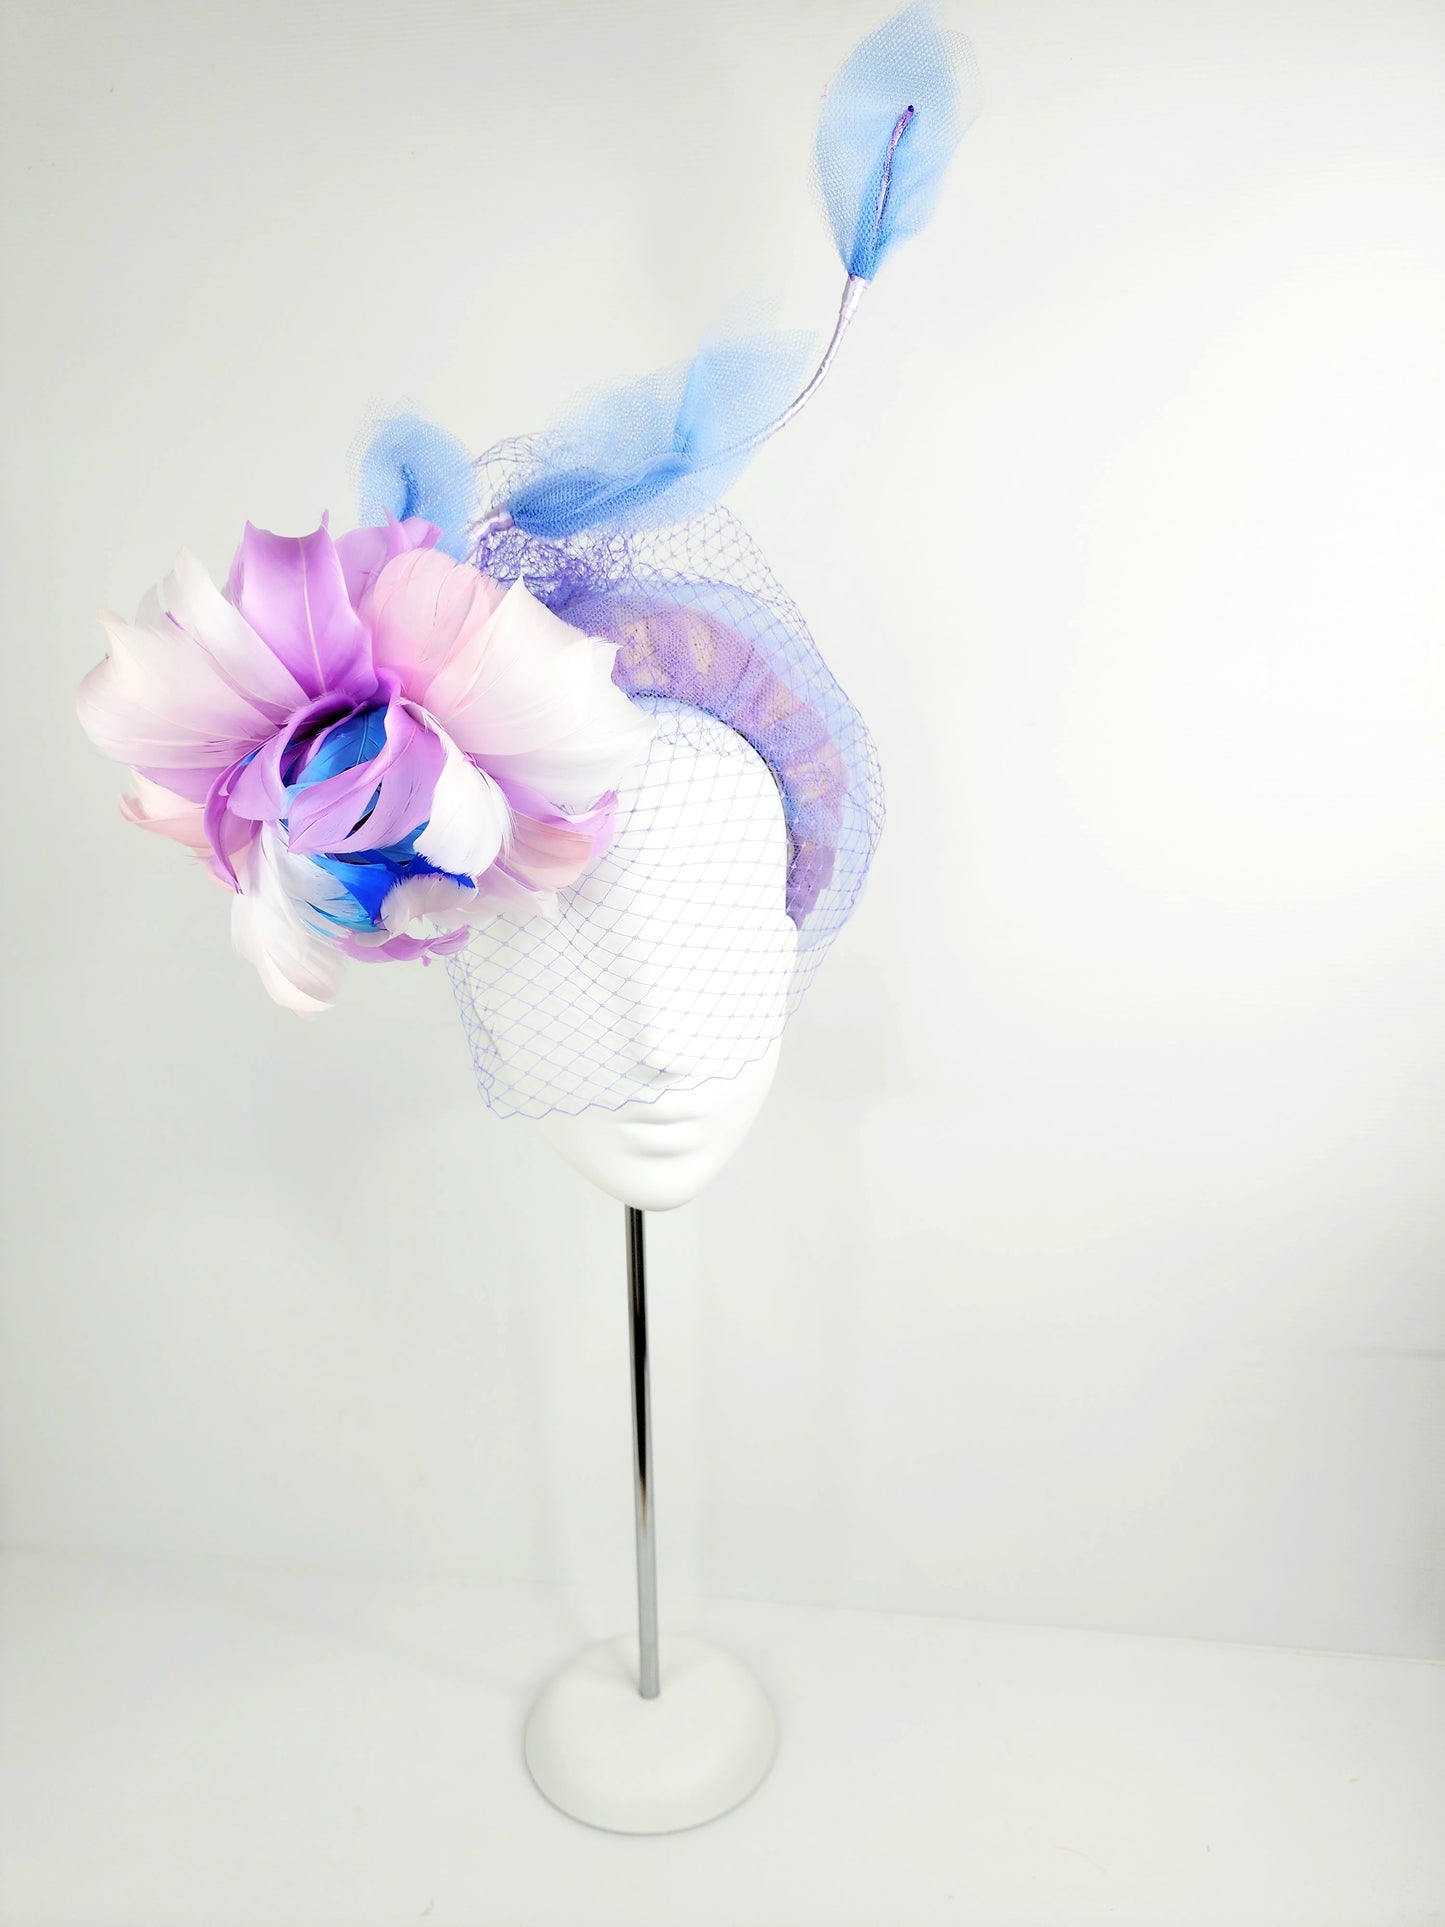 New millinery, a stunner